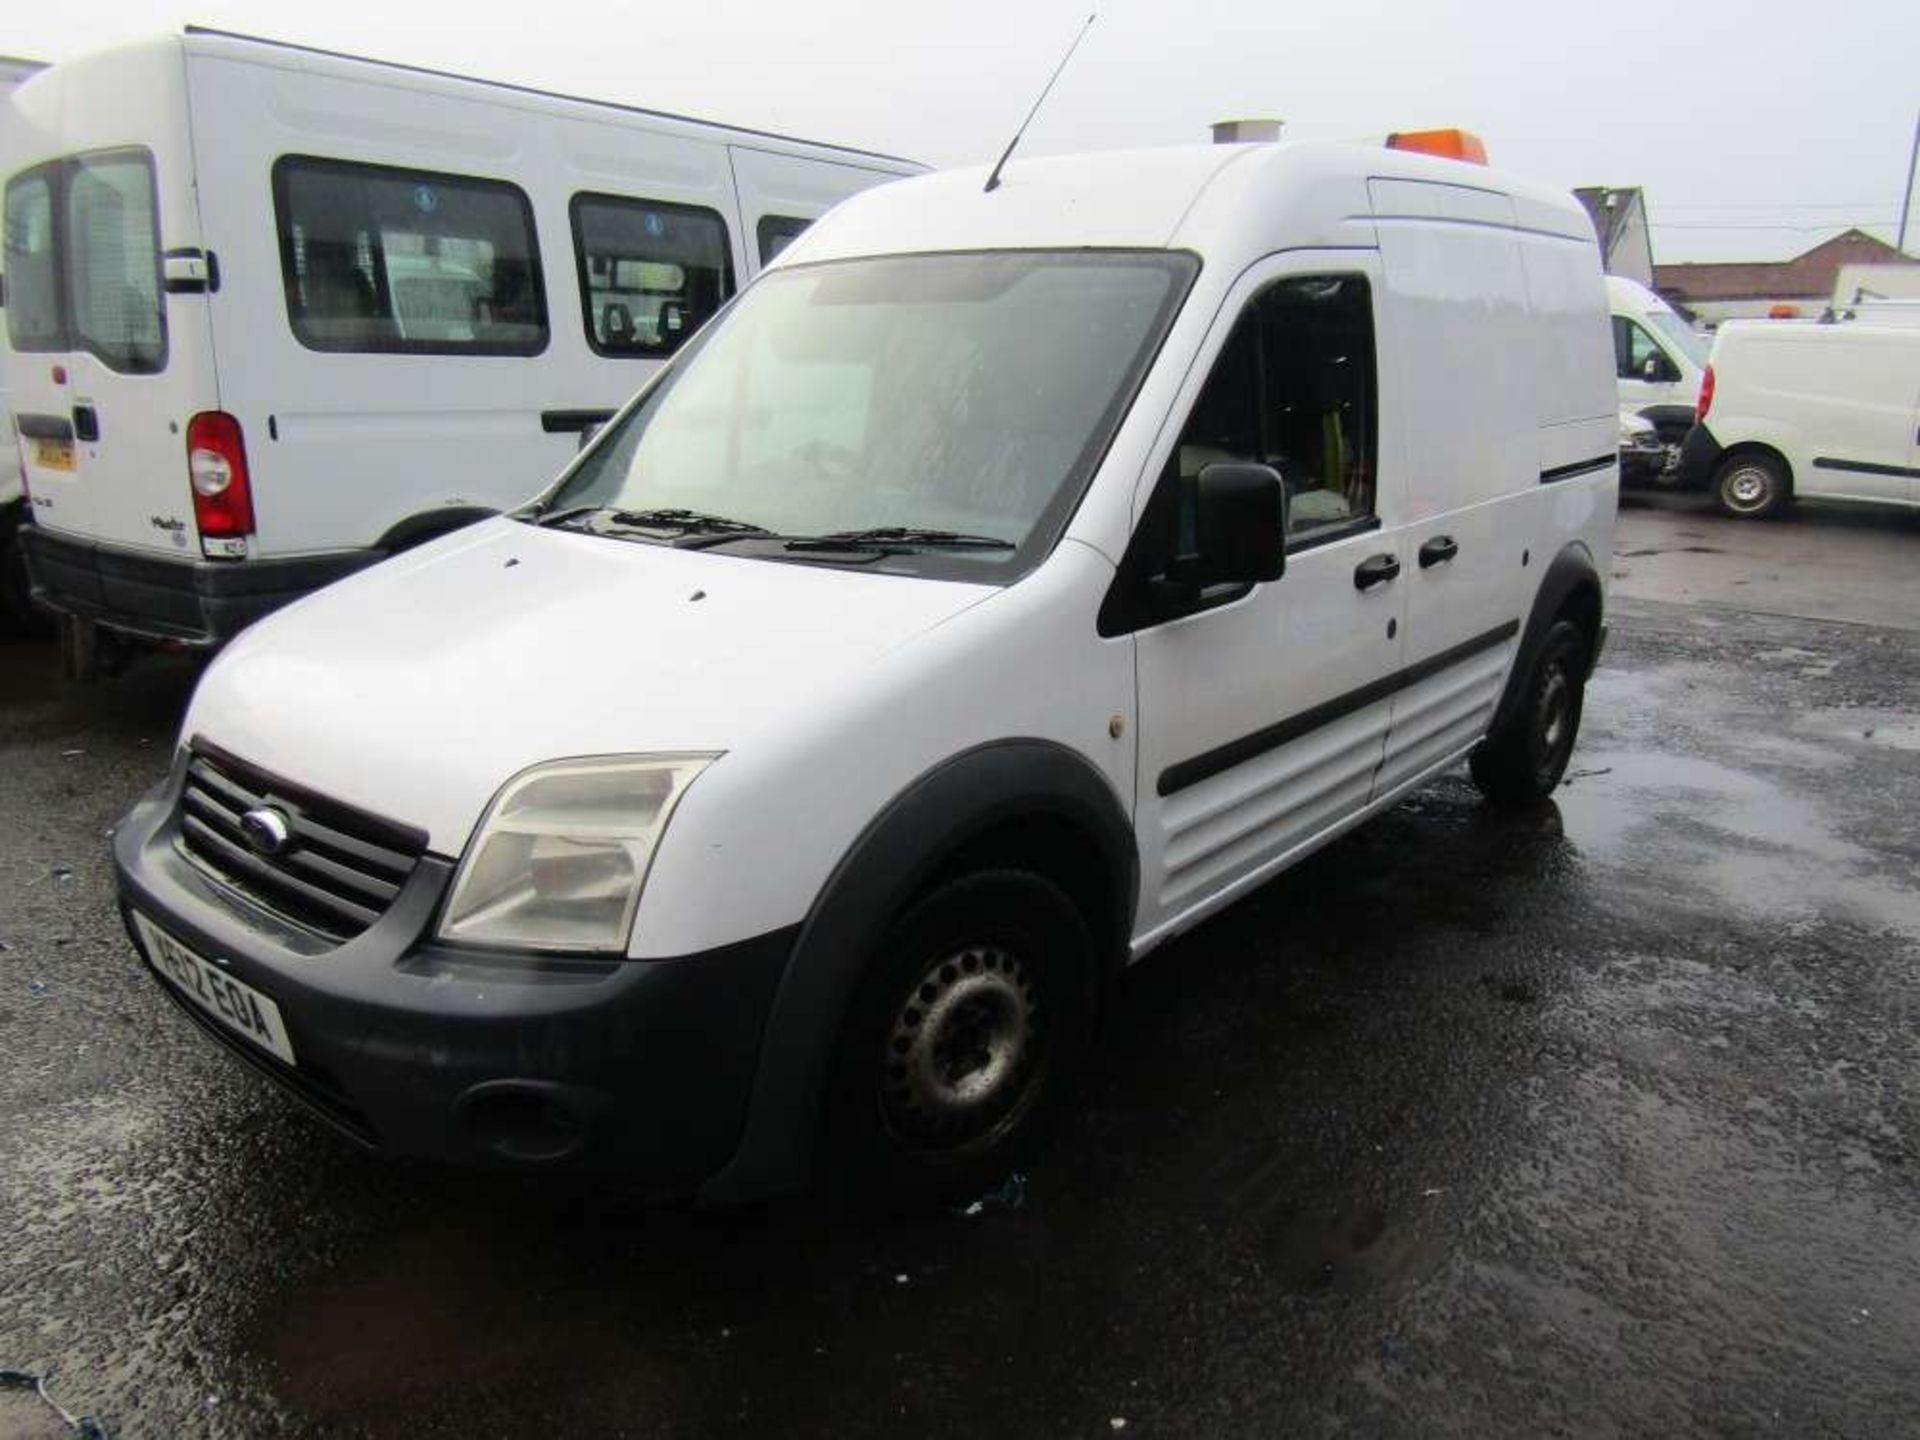 2012 12 reg Ford Transit Connect 90 T230 (Runs & Drives but engine issues) (Direct UU Water) - Image 2 of 8